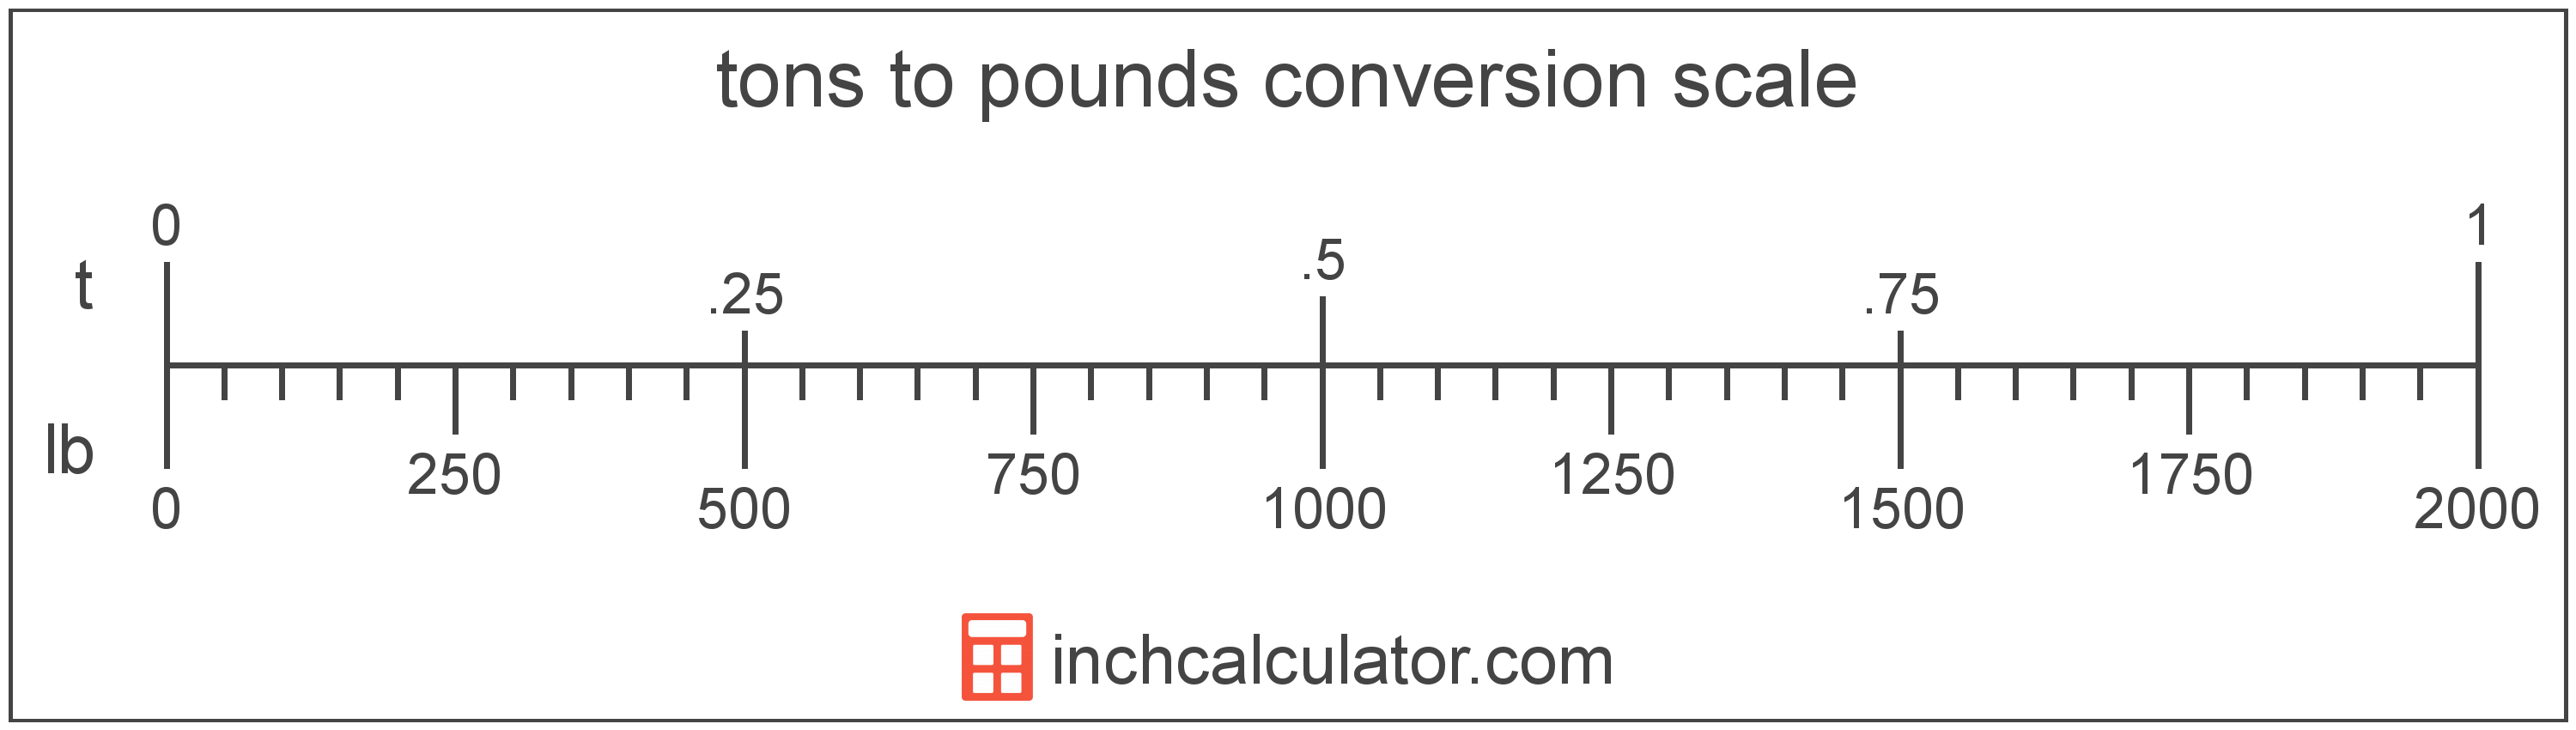 how to convert tons to pounds